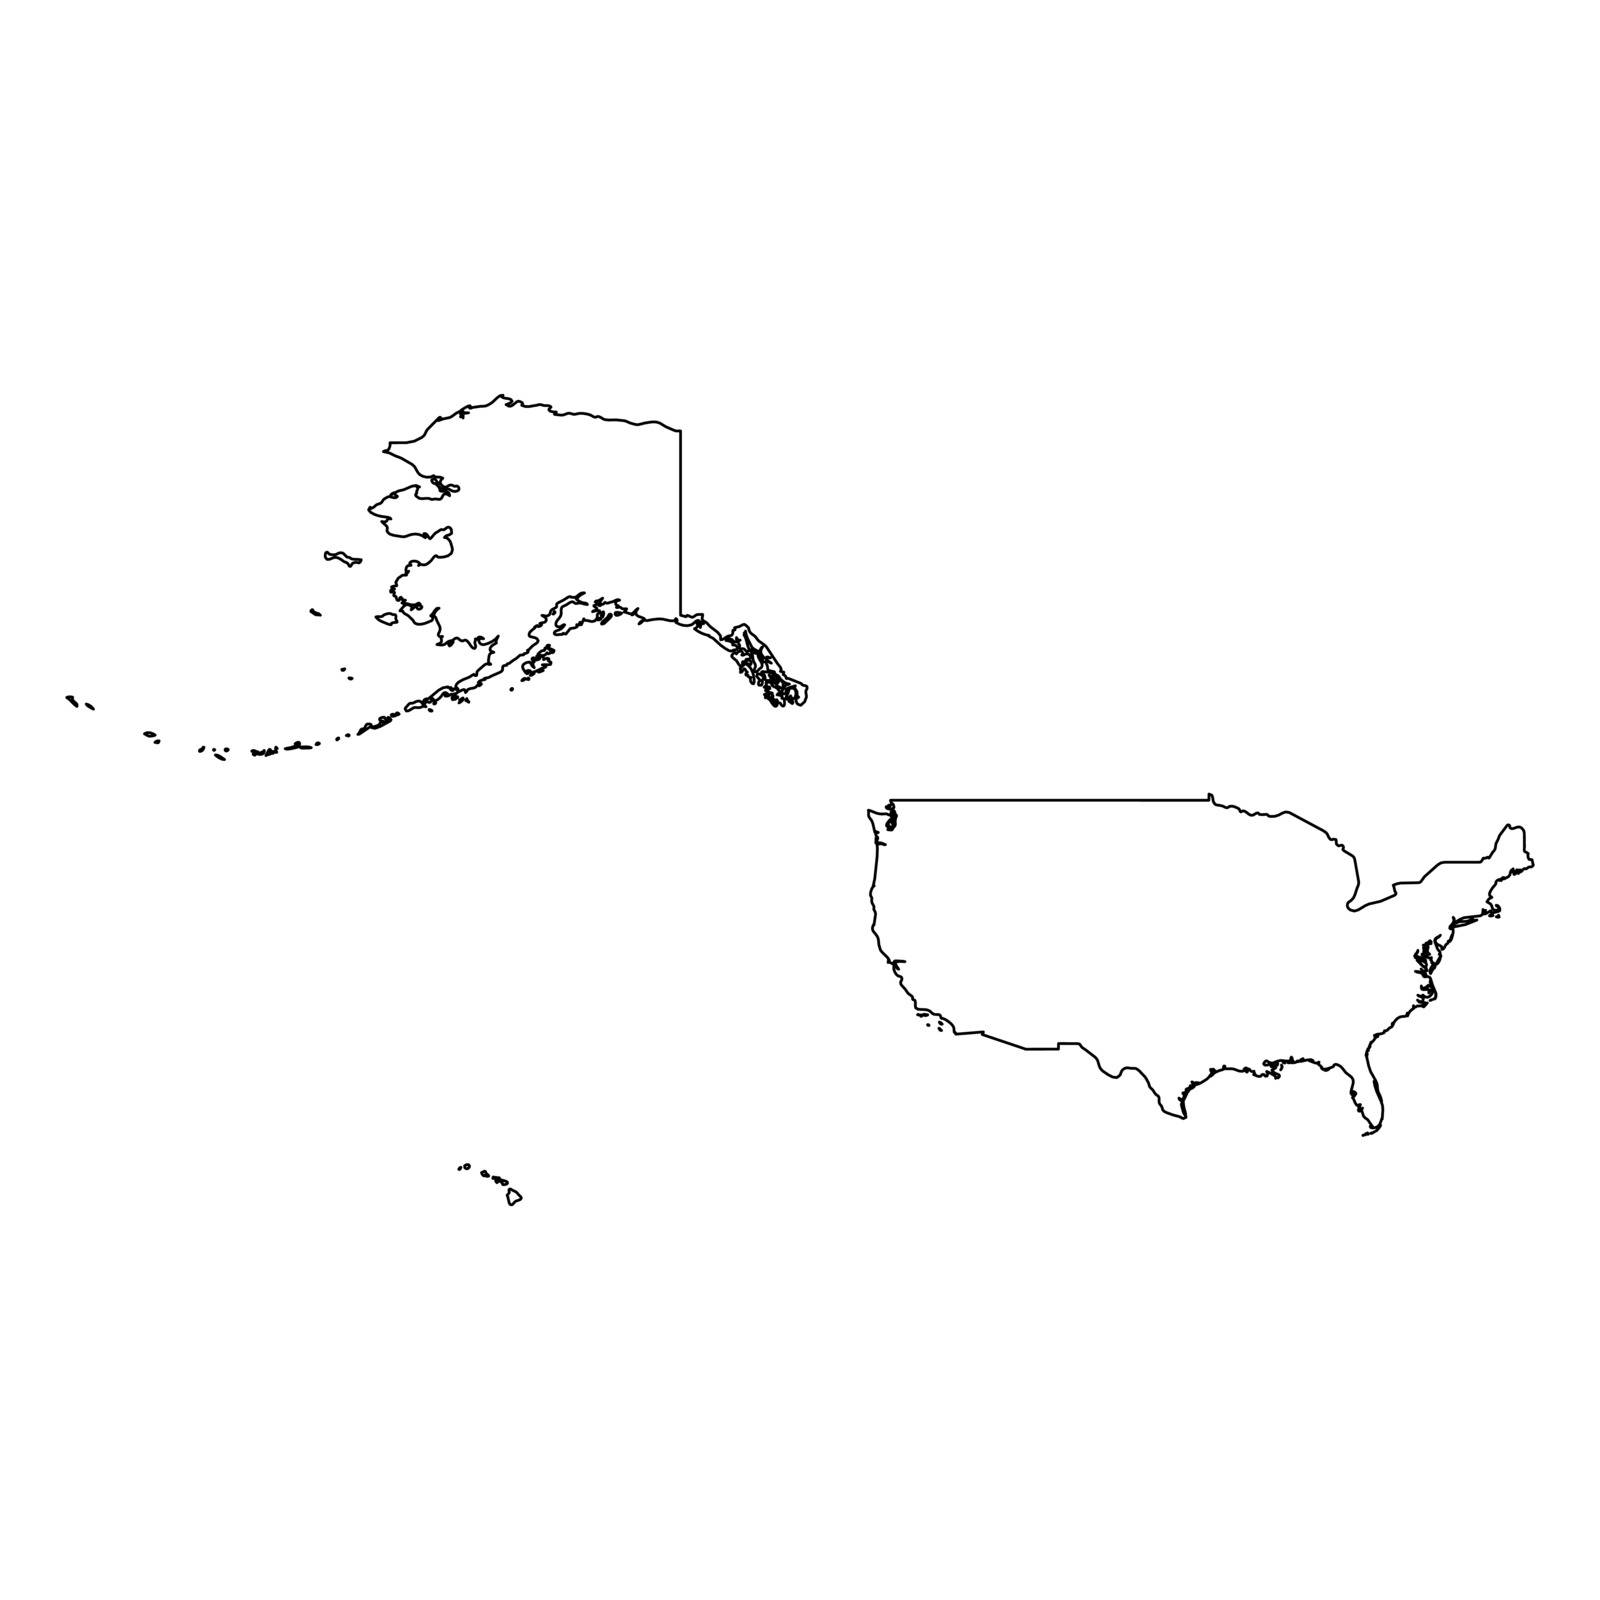 United States of America, USA - solid black outline border map of country area. Simple flat vector illustration by pyty